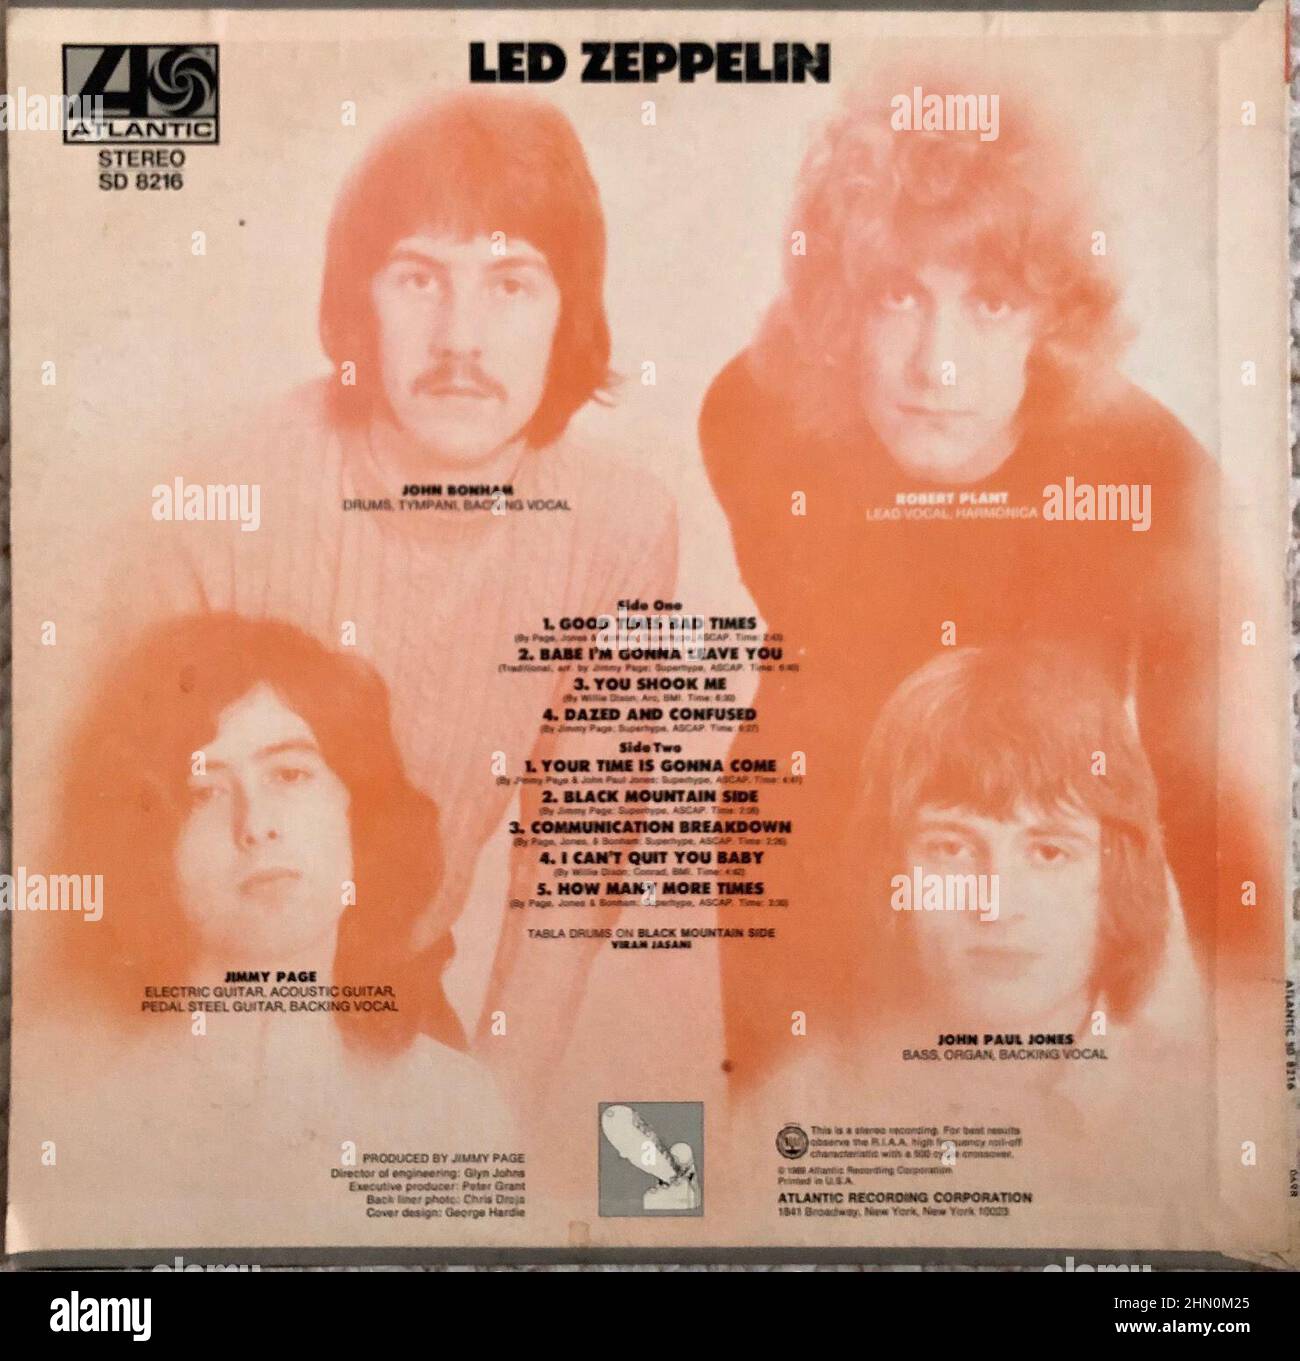 Led Zeppelin, 1960s Rock Music Collection Stock Photo